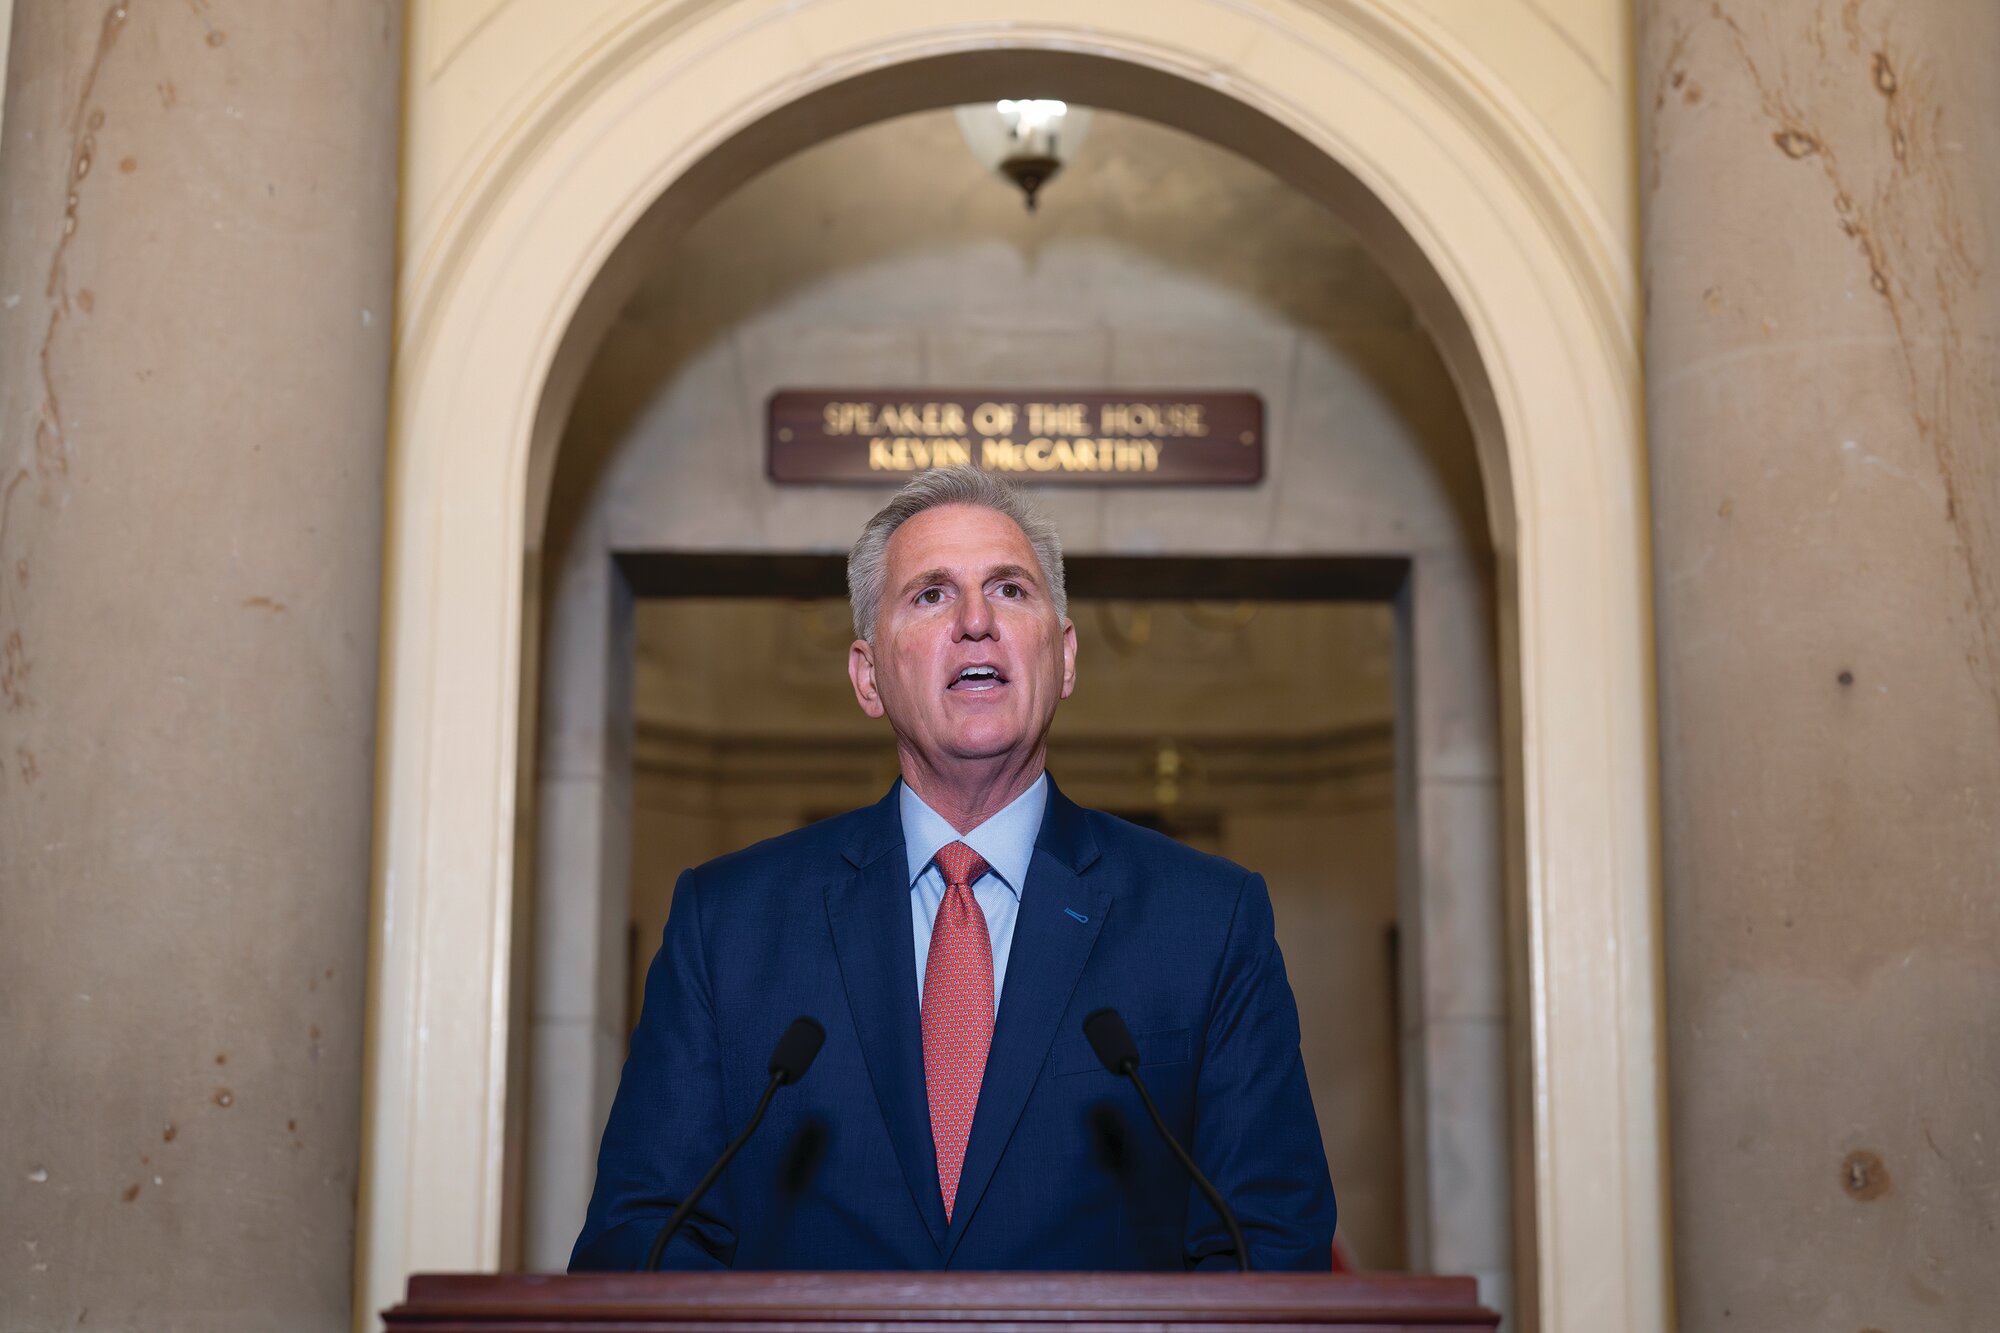 Speaker of the House Kevin McCarthy, R-Calif., speaks at the Capitol in Washington, Tuesday, Sept. 12, 2023. McCarthy directed a House committee to open a formal impeachment inquiry into President Joe Biden.